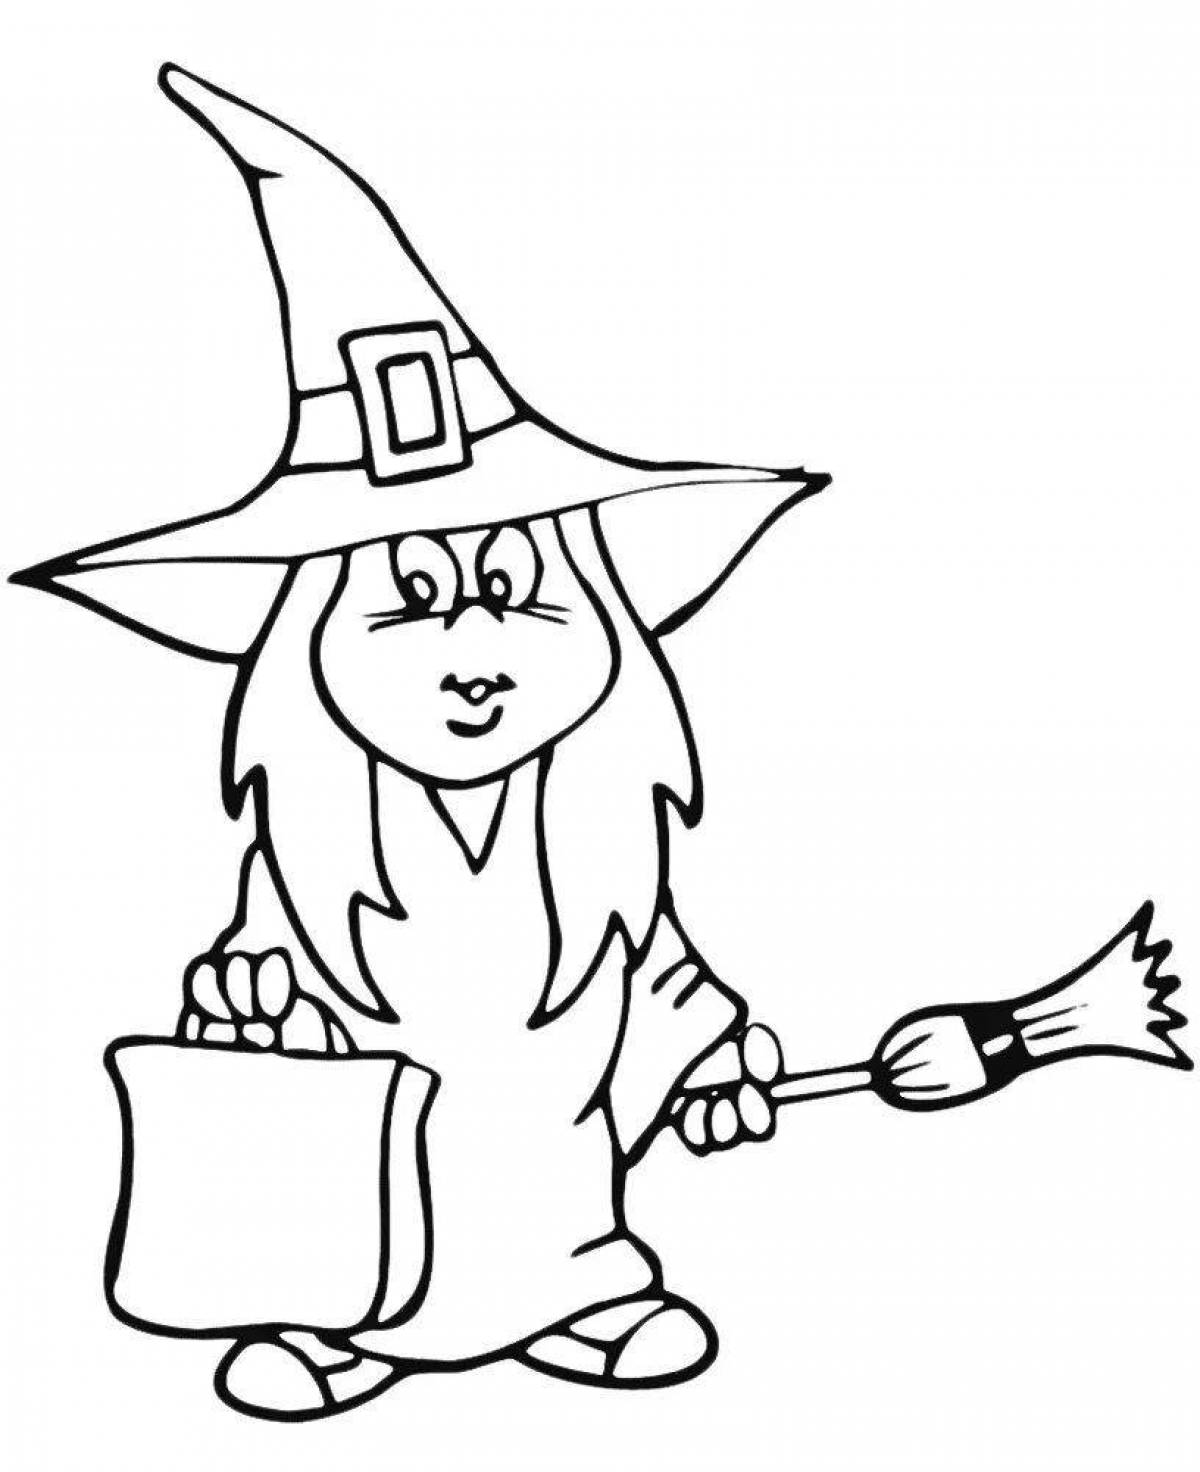 Superstitious coloring book for real witches